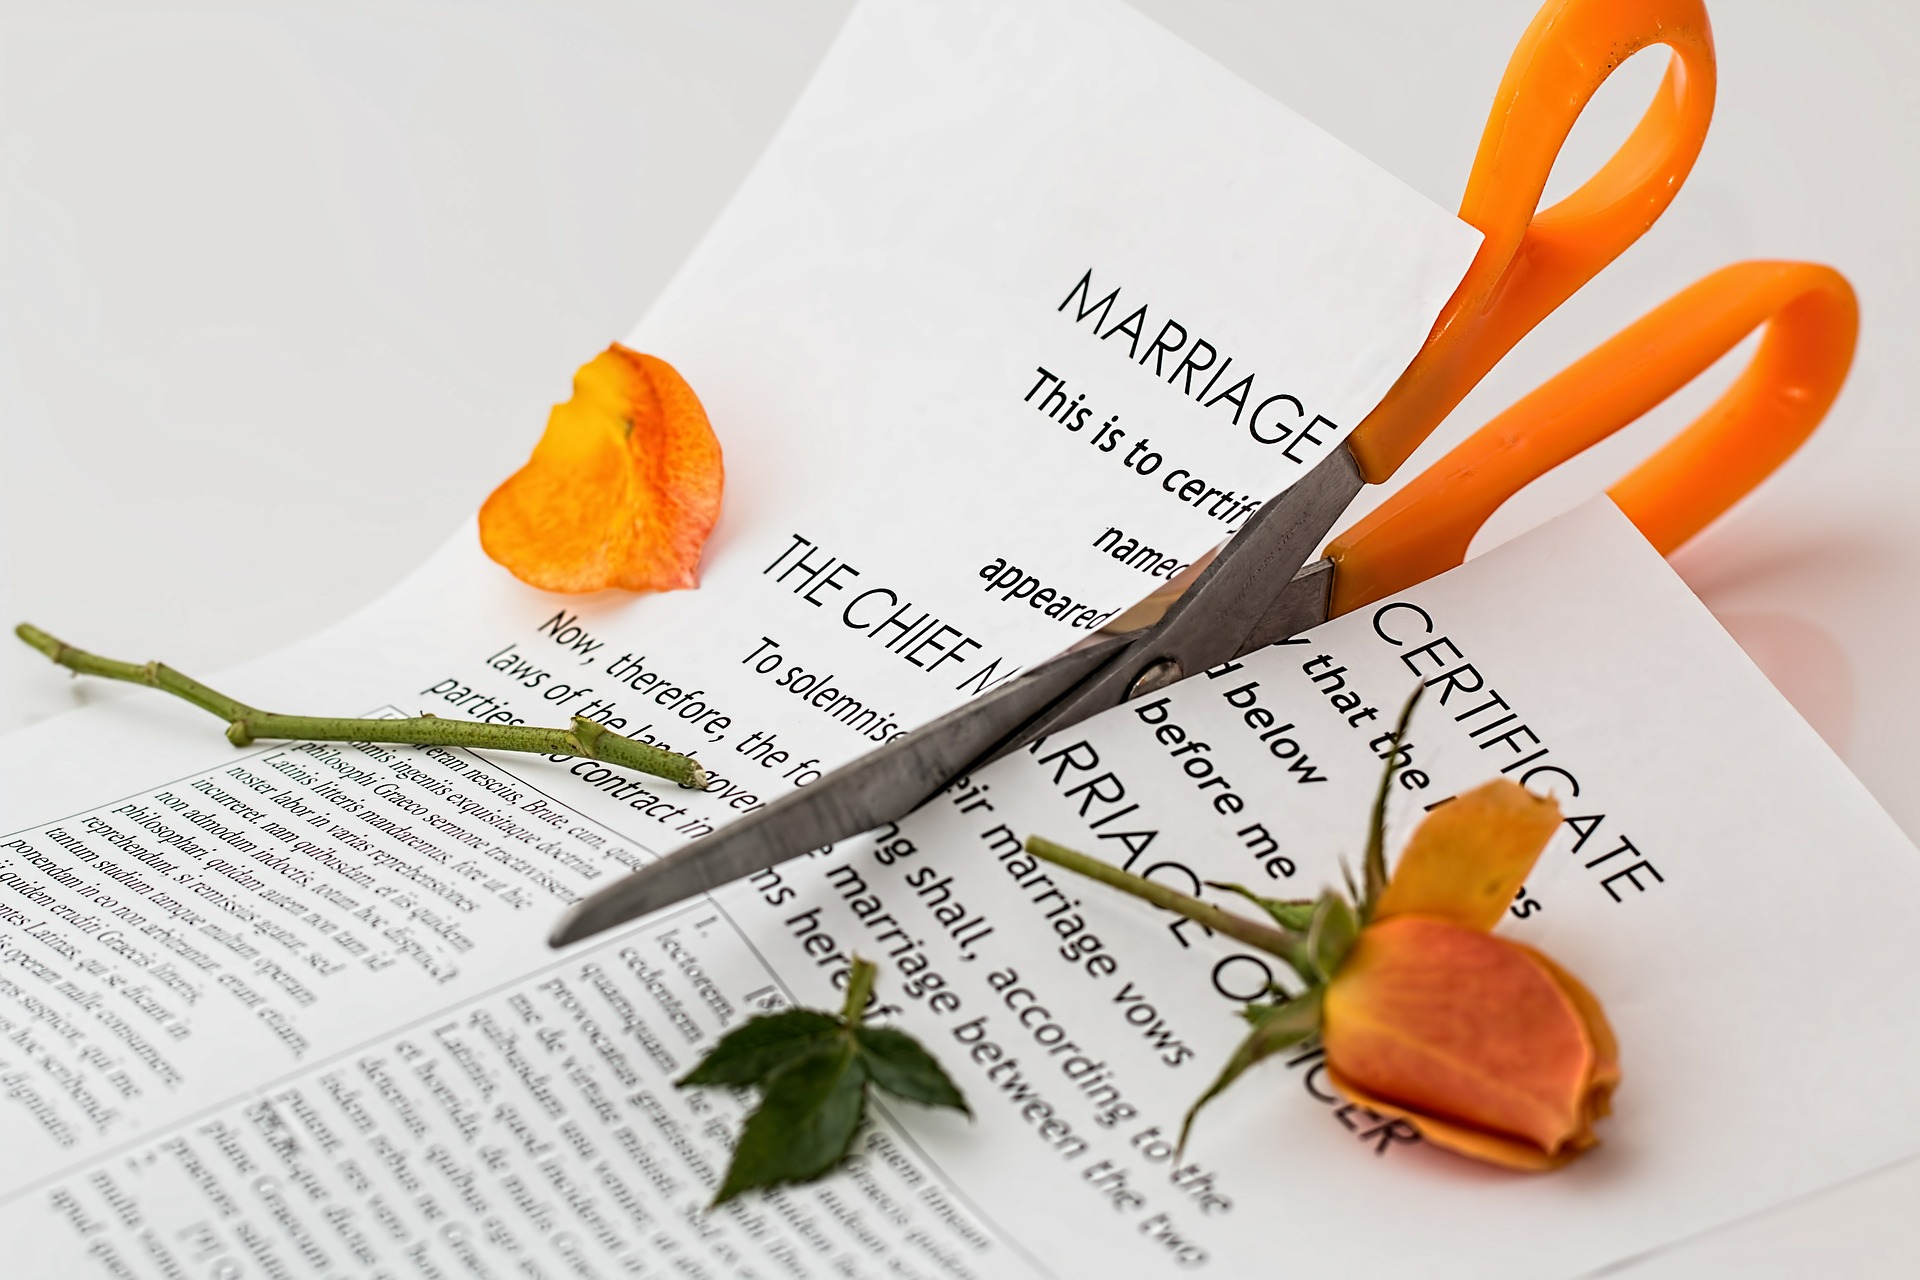 Separation and divorce in marriage